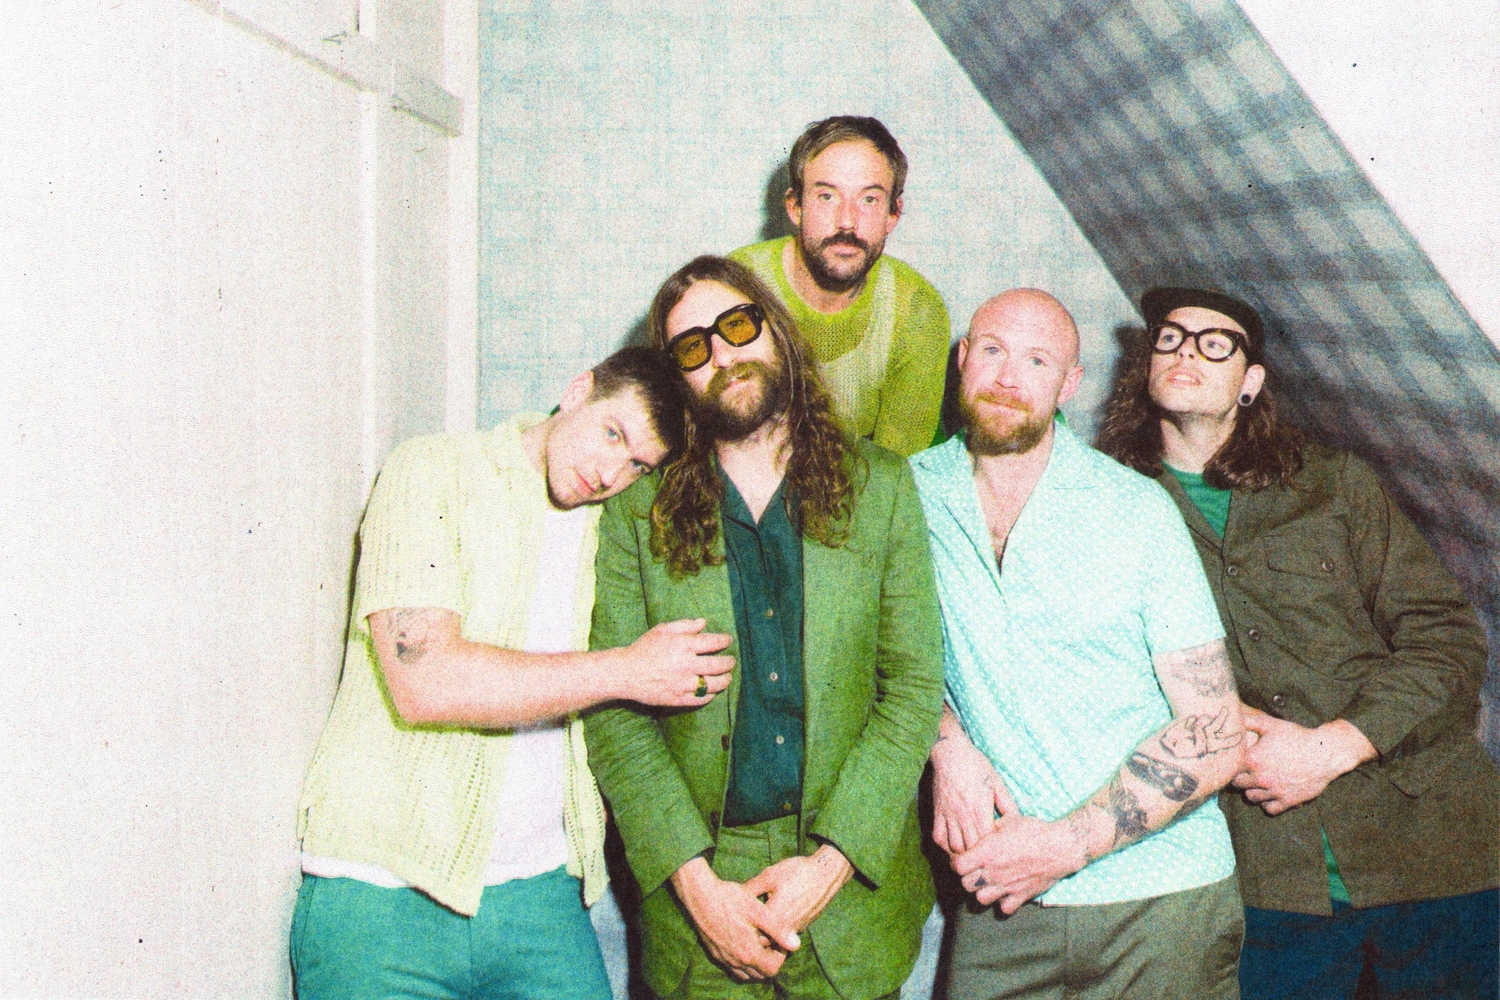 IDLES share new single ‘Gift Horse’ and confirm UK album release shows